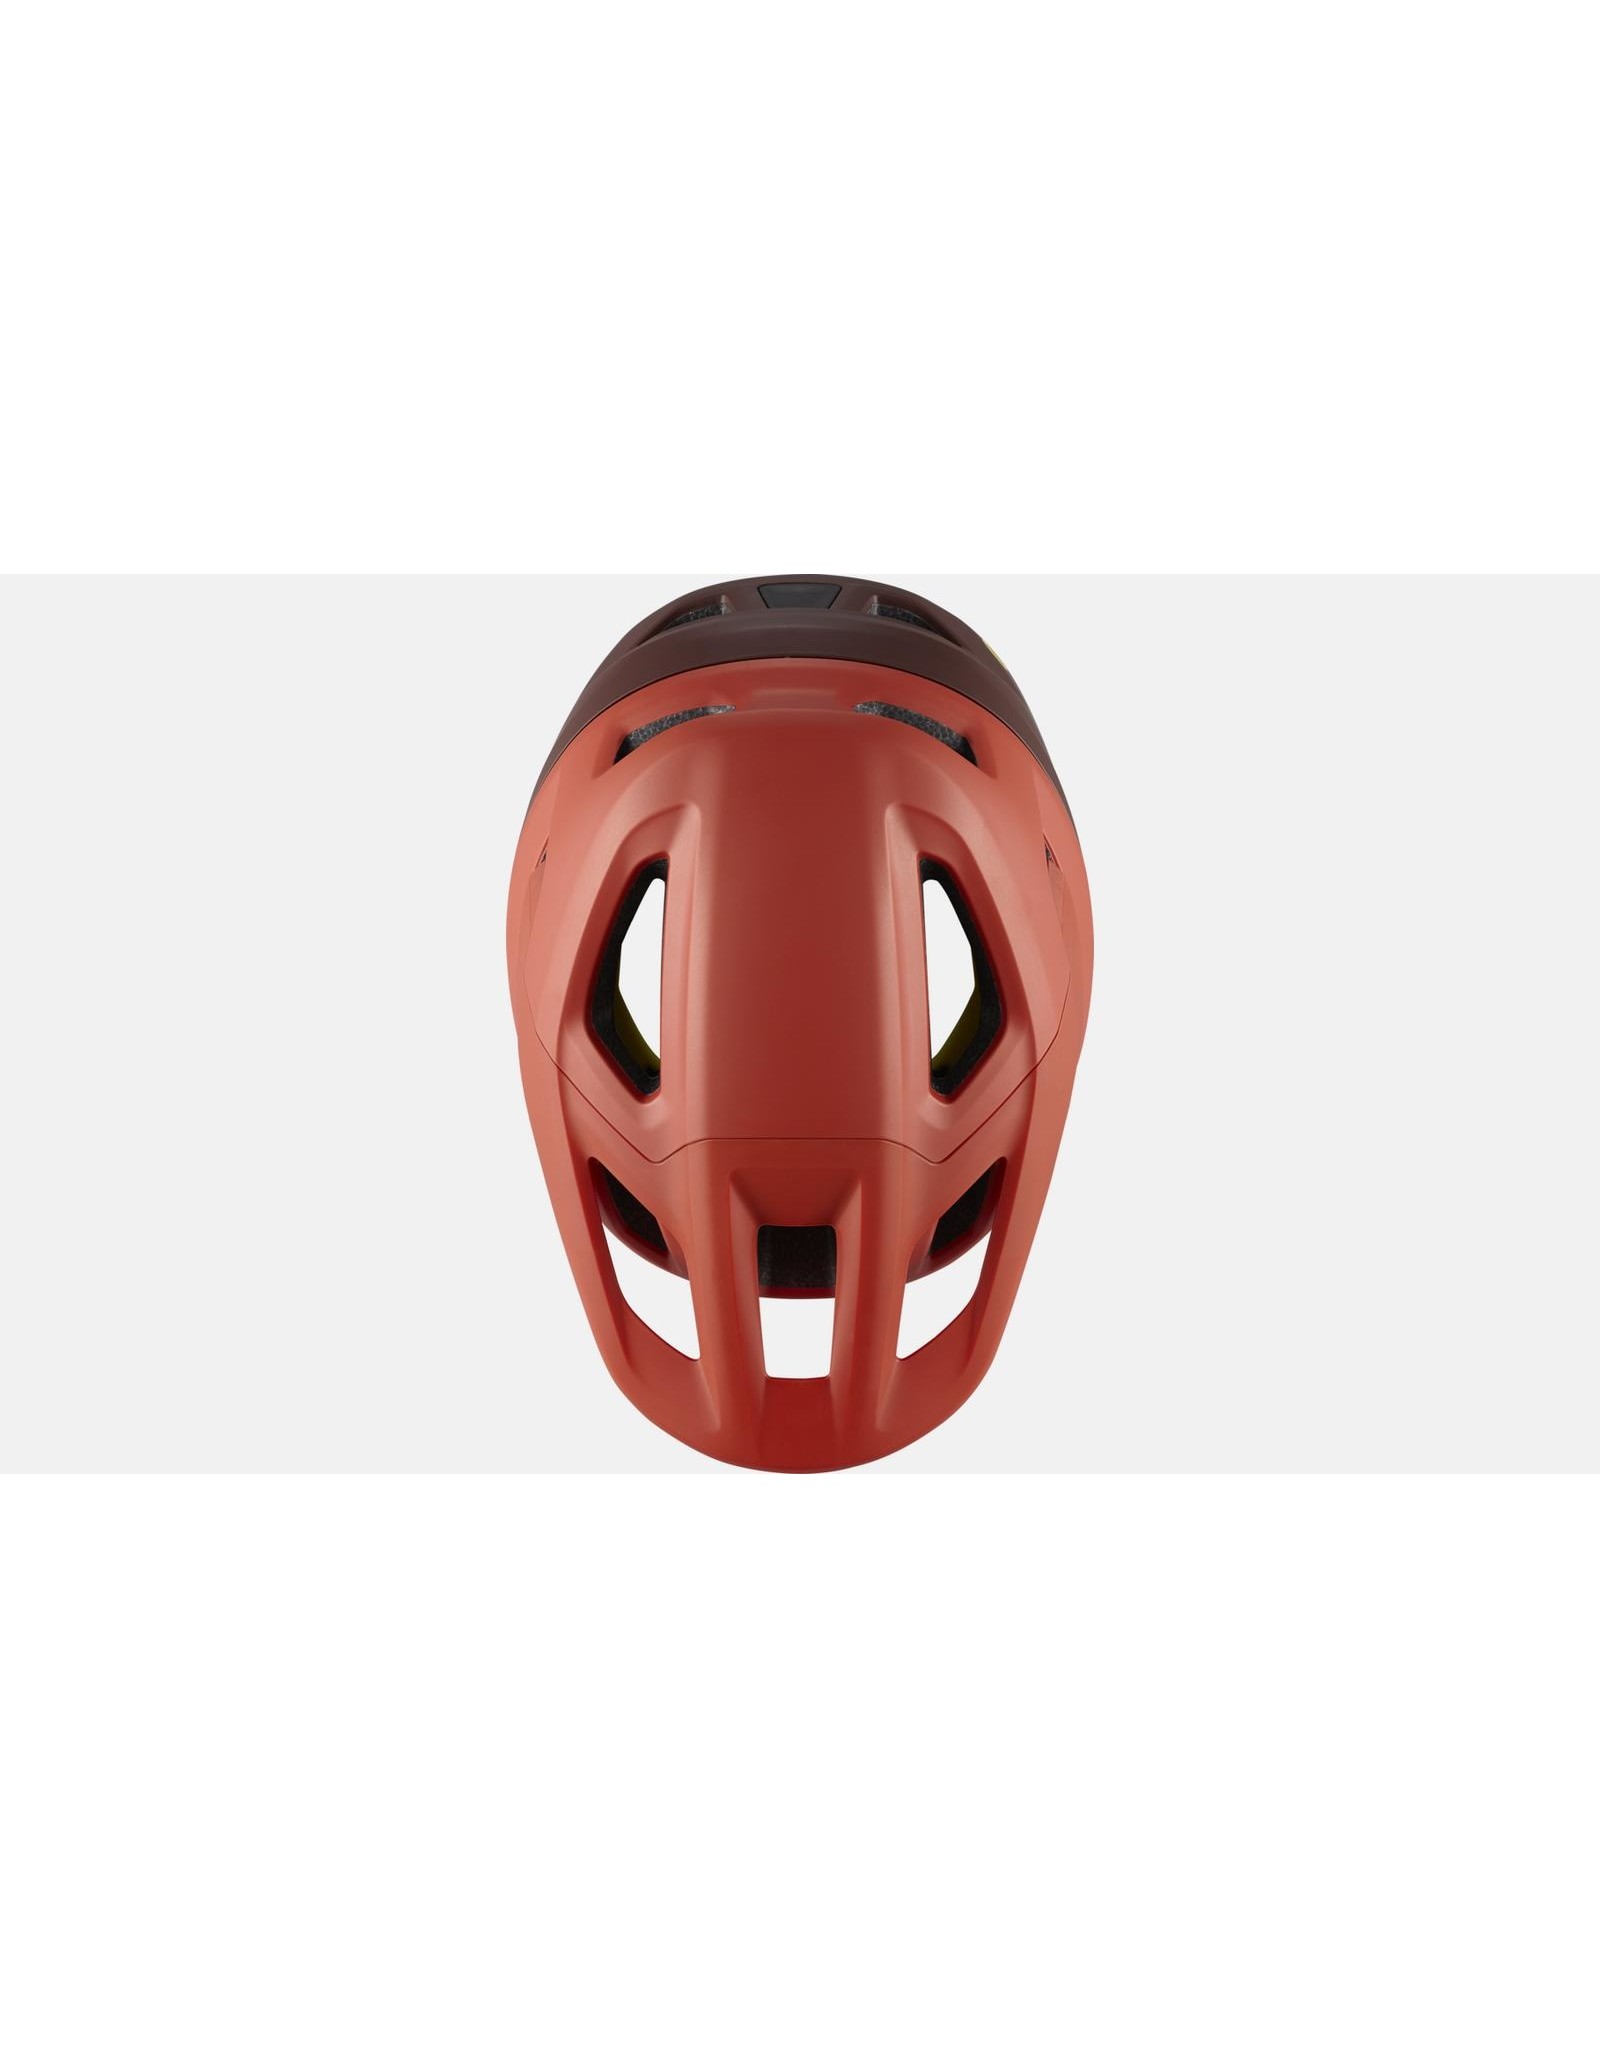 SPECIALIZED Specialized Camber Helmet - Fiery Rusted Red - M